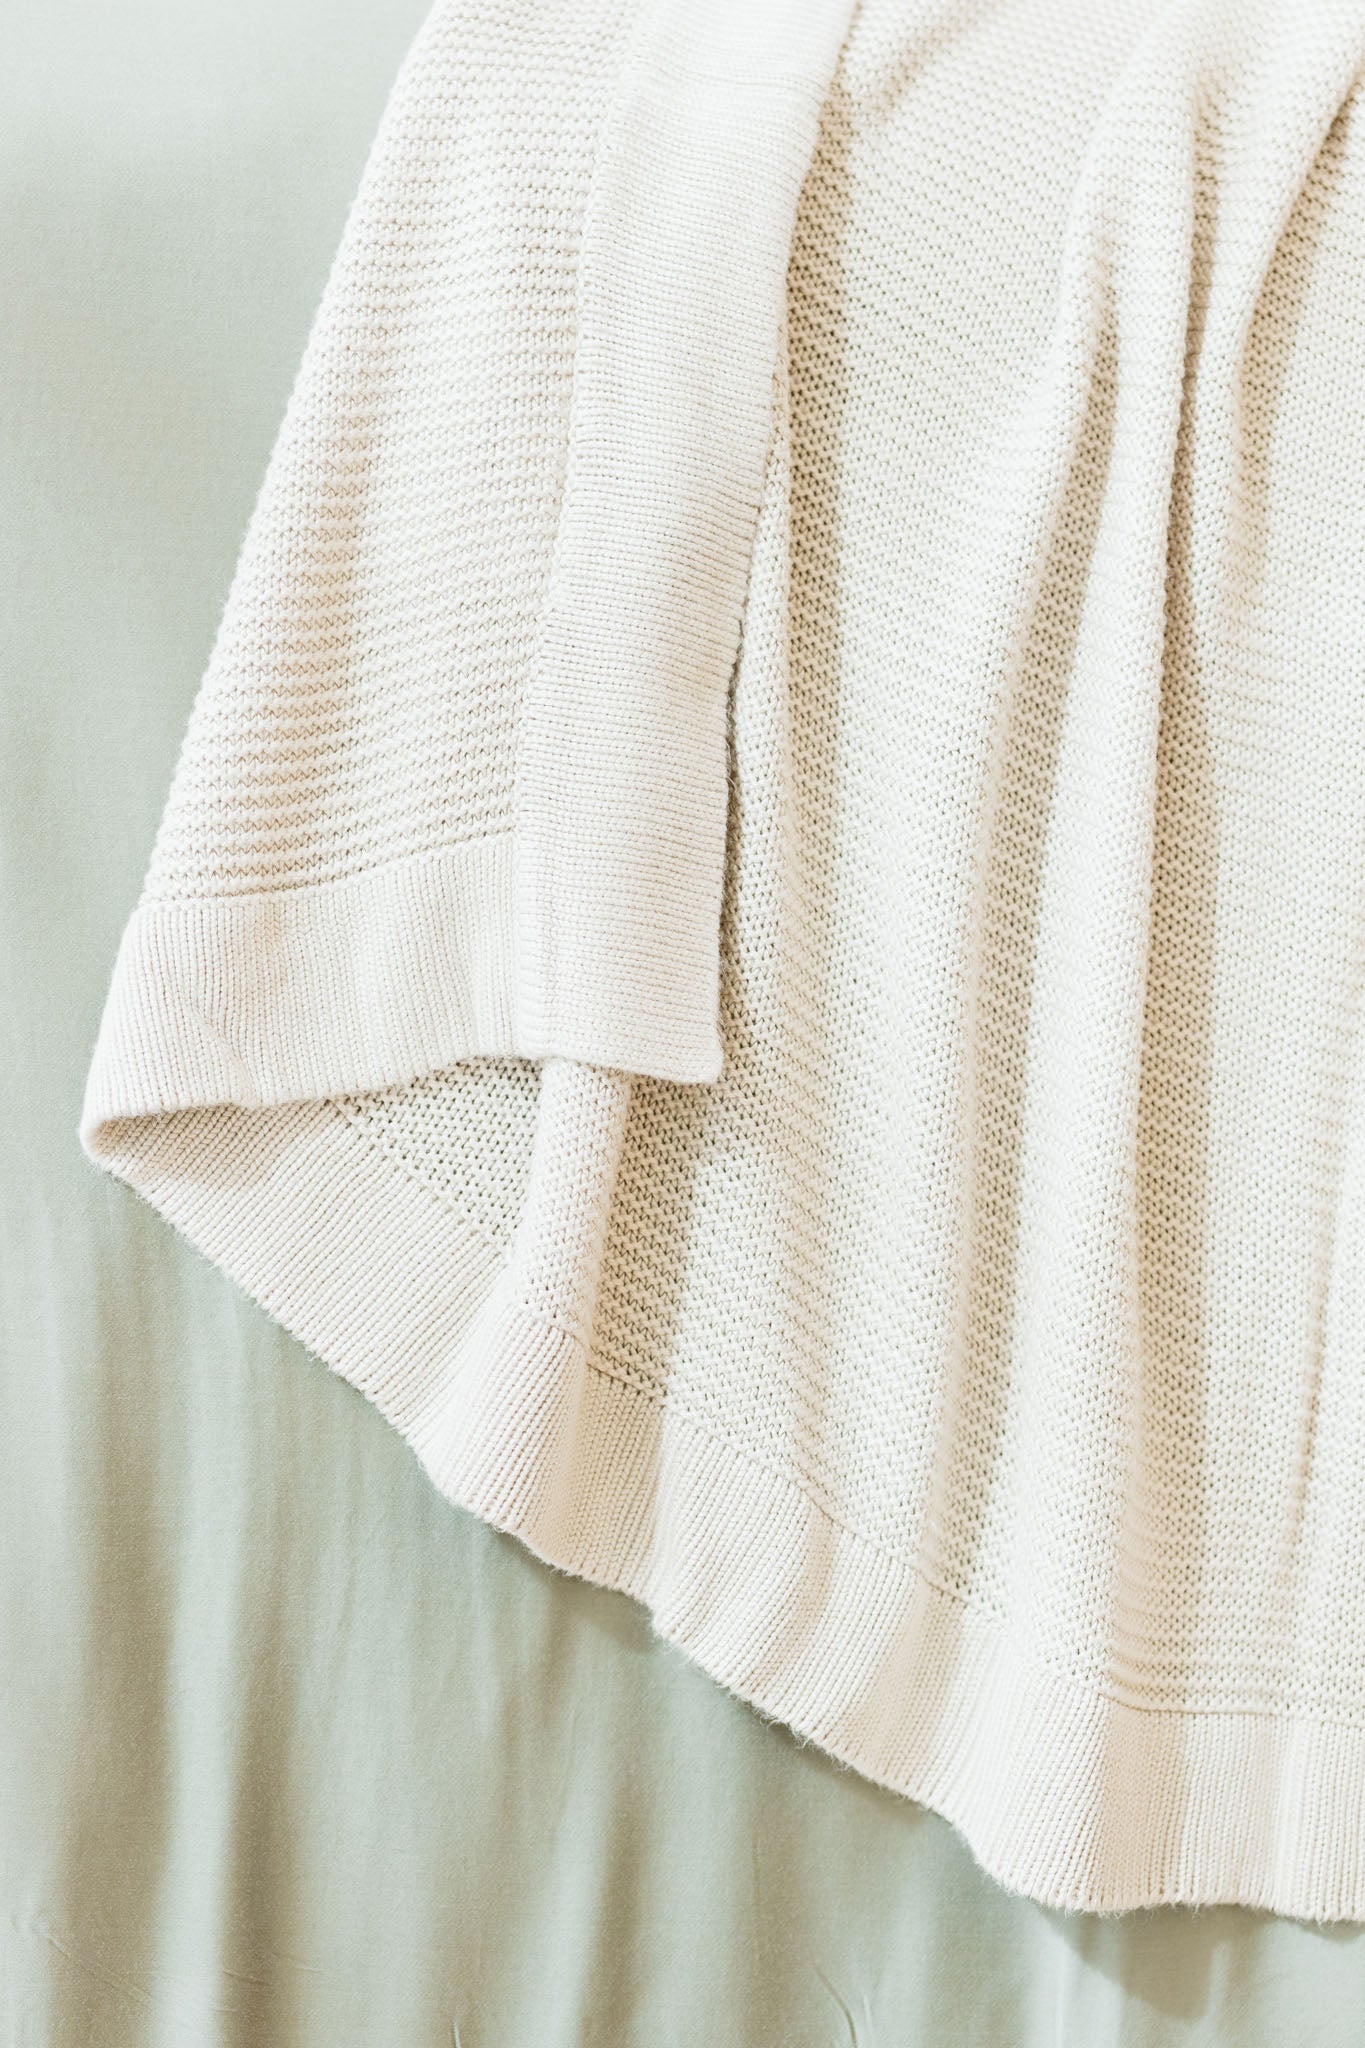 Driftwood cloud knit blanket close up draped over bed |Color:Driftwood